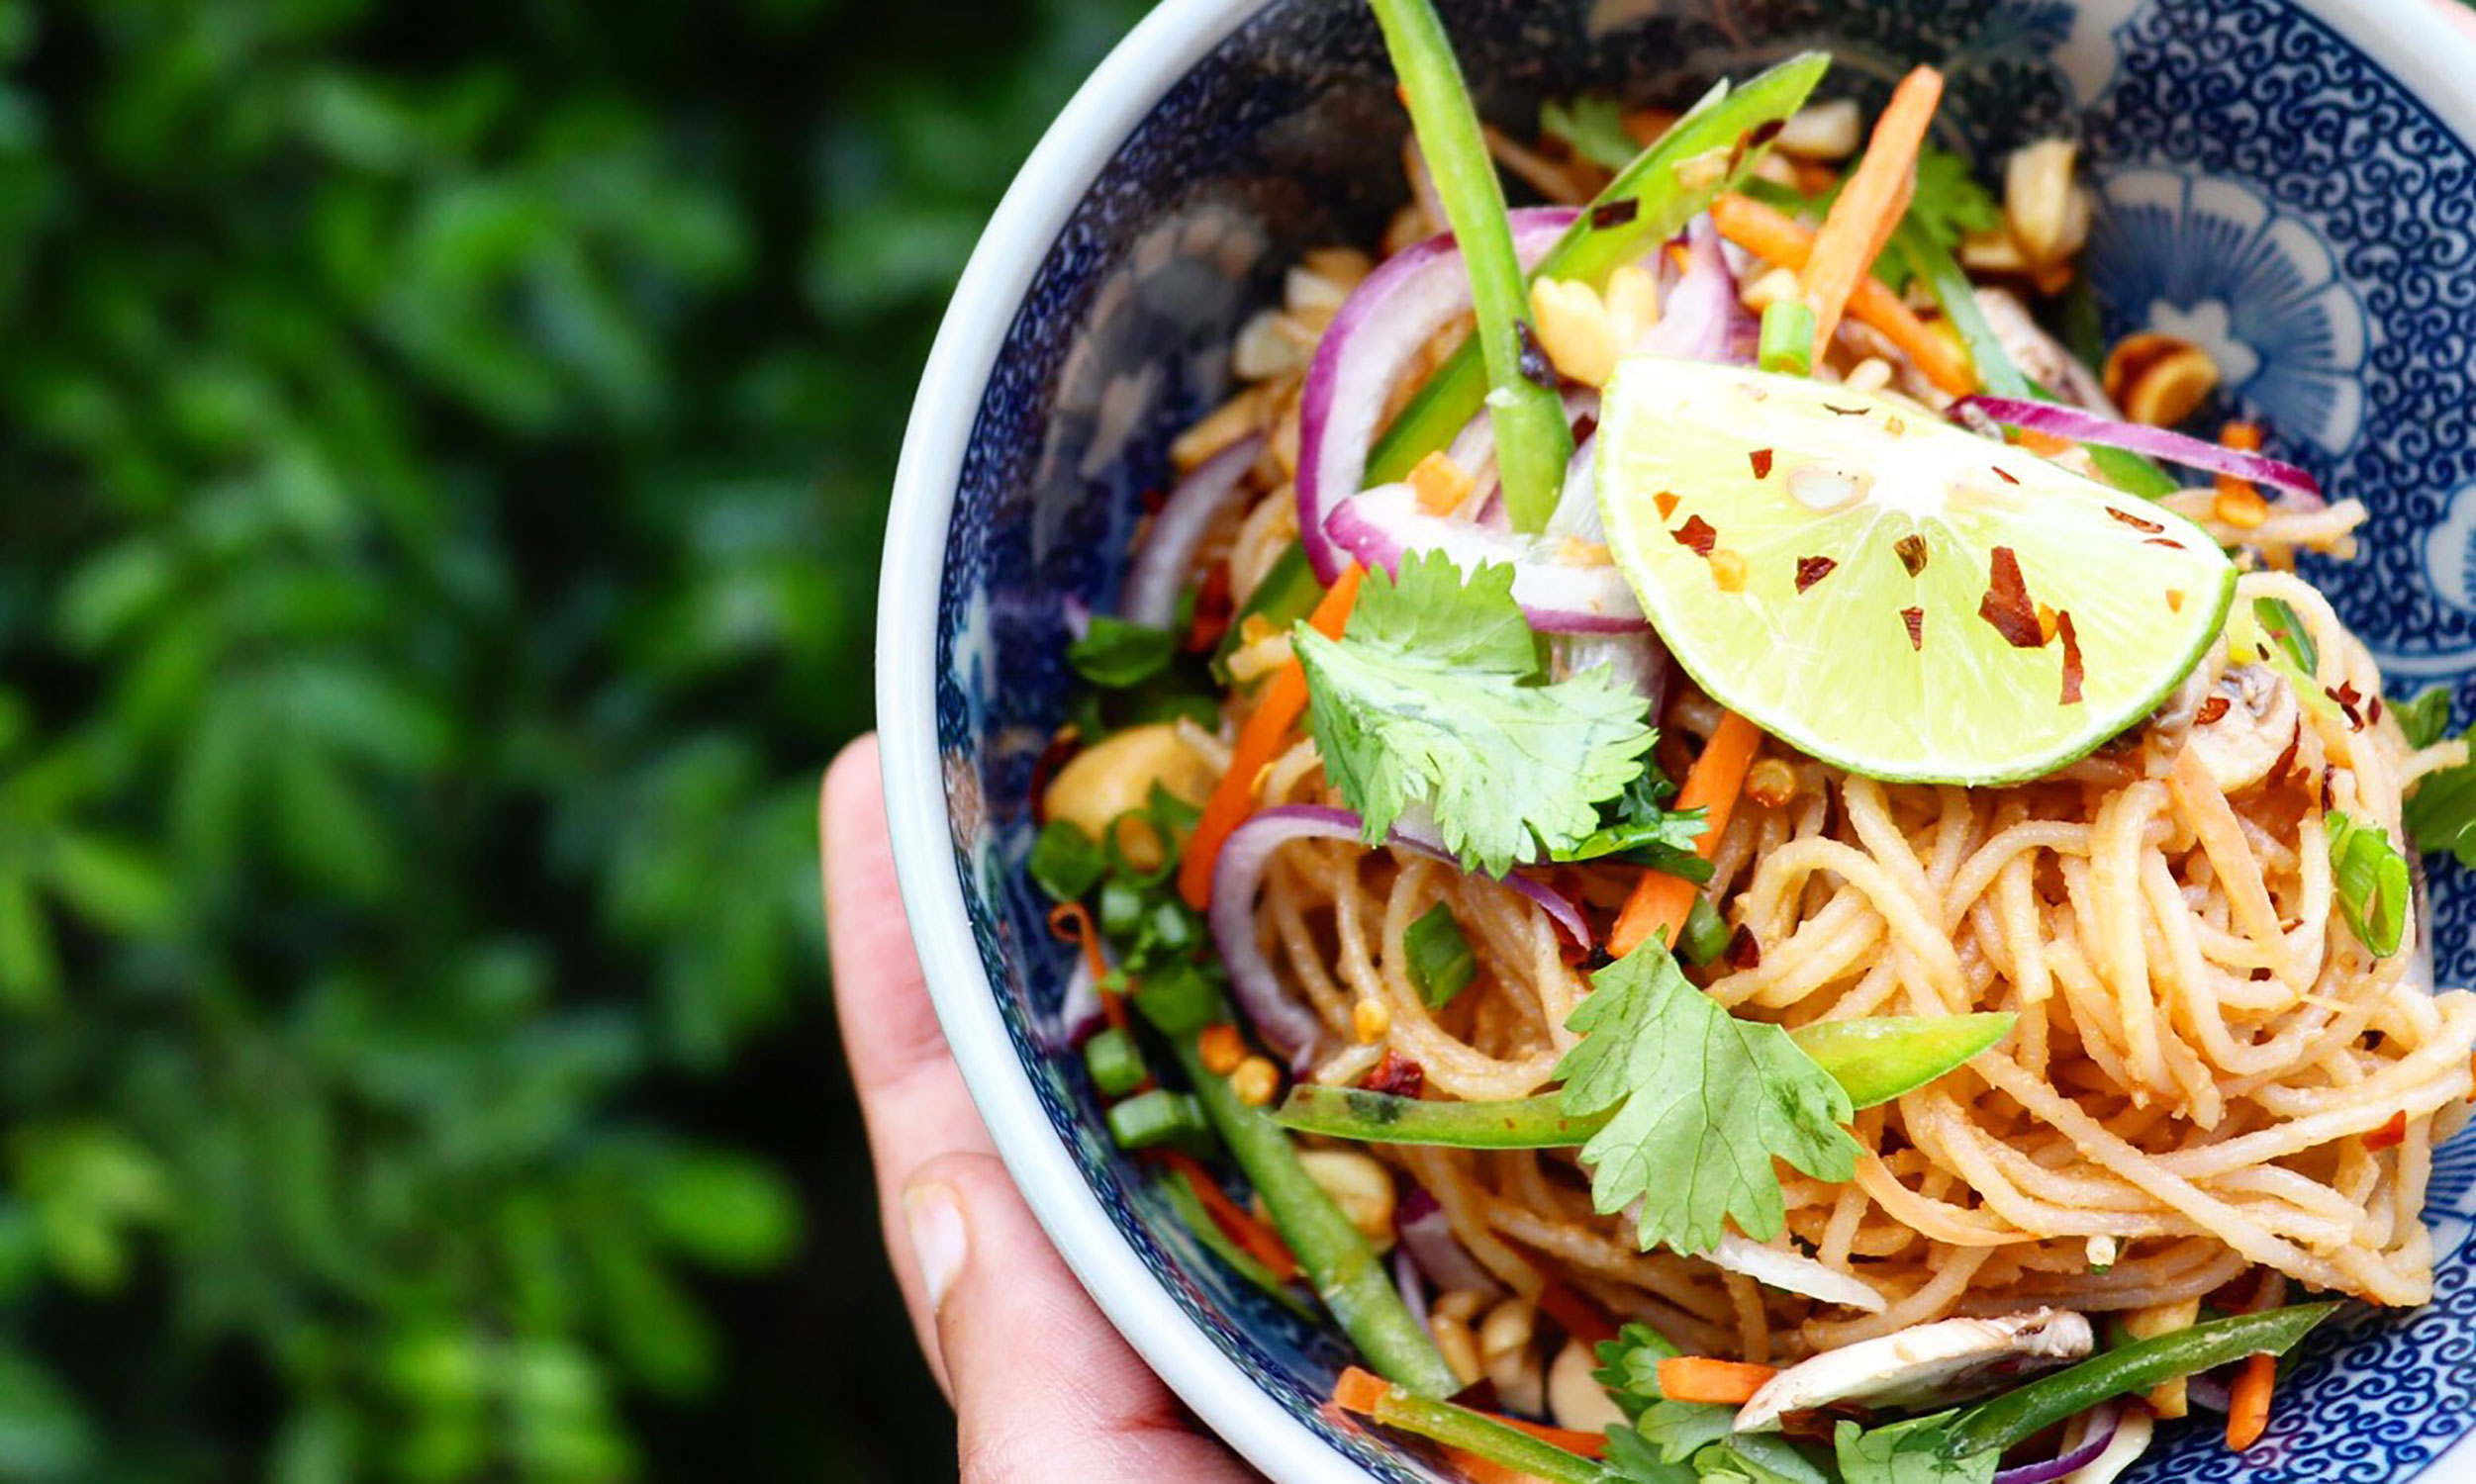 Toss Noodles Peanut Butter And Chilli For A Healthy Lunch